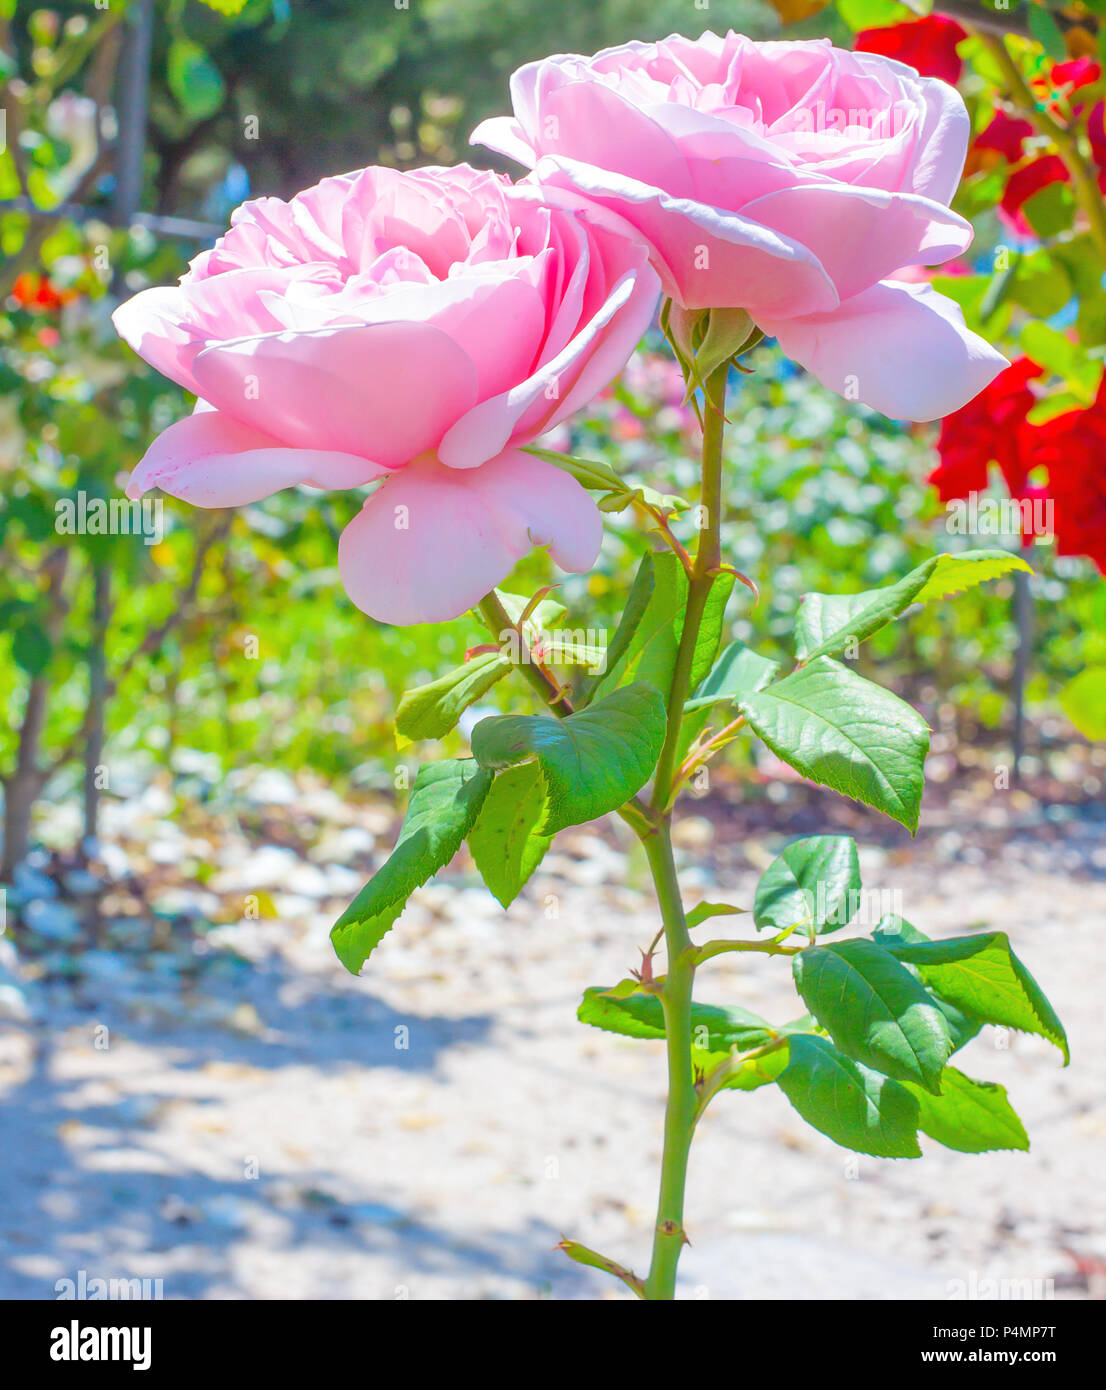 Colorful, beautiful, delicate rose in the garden, roses flower ...